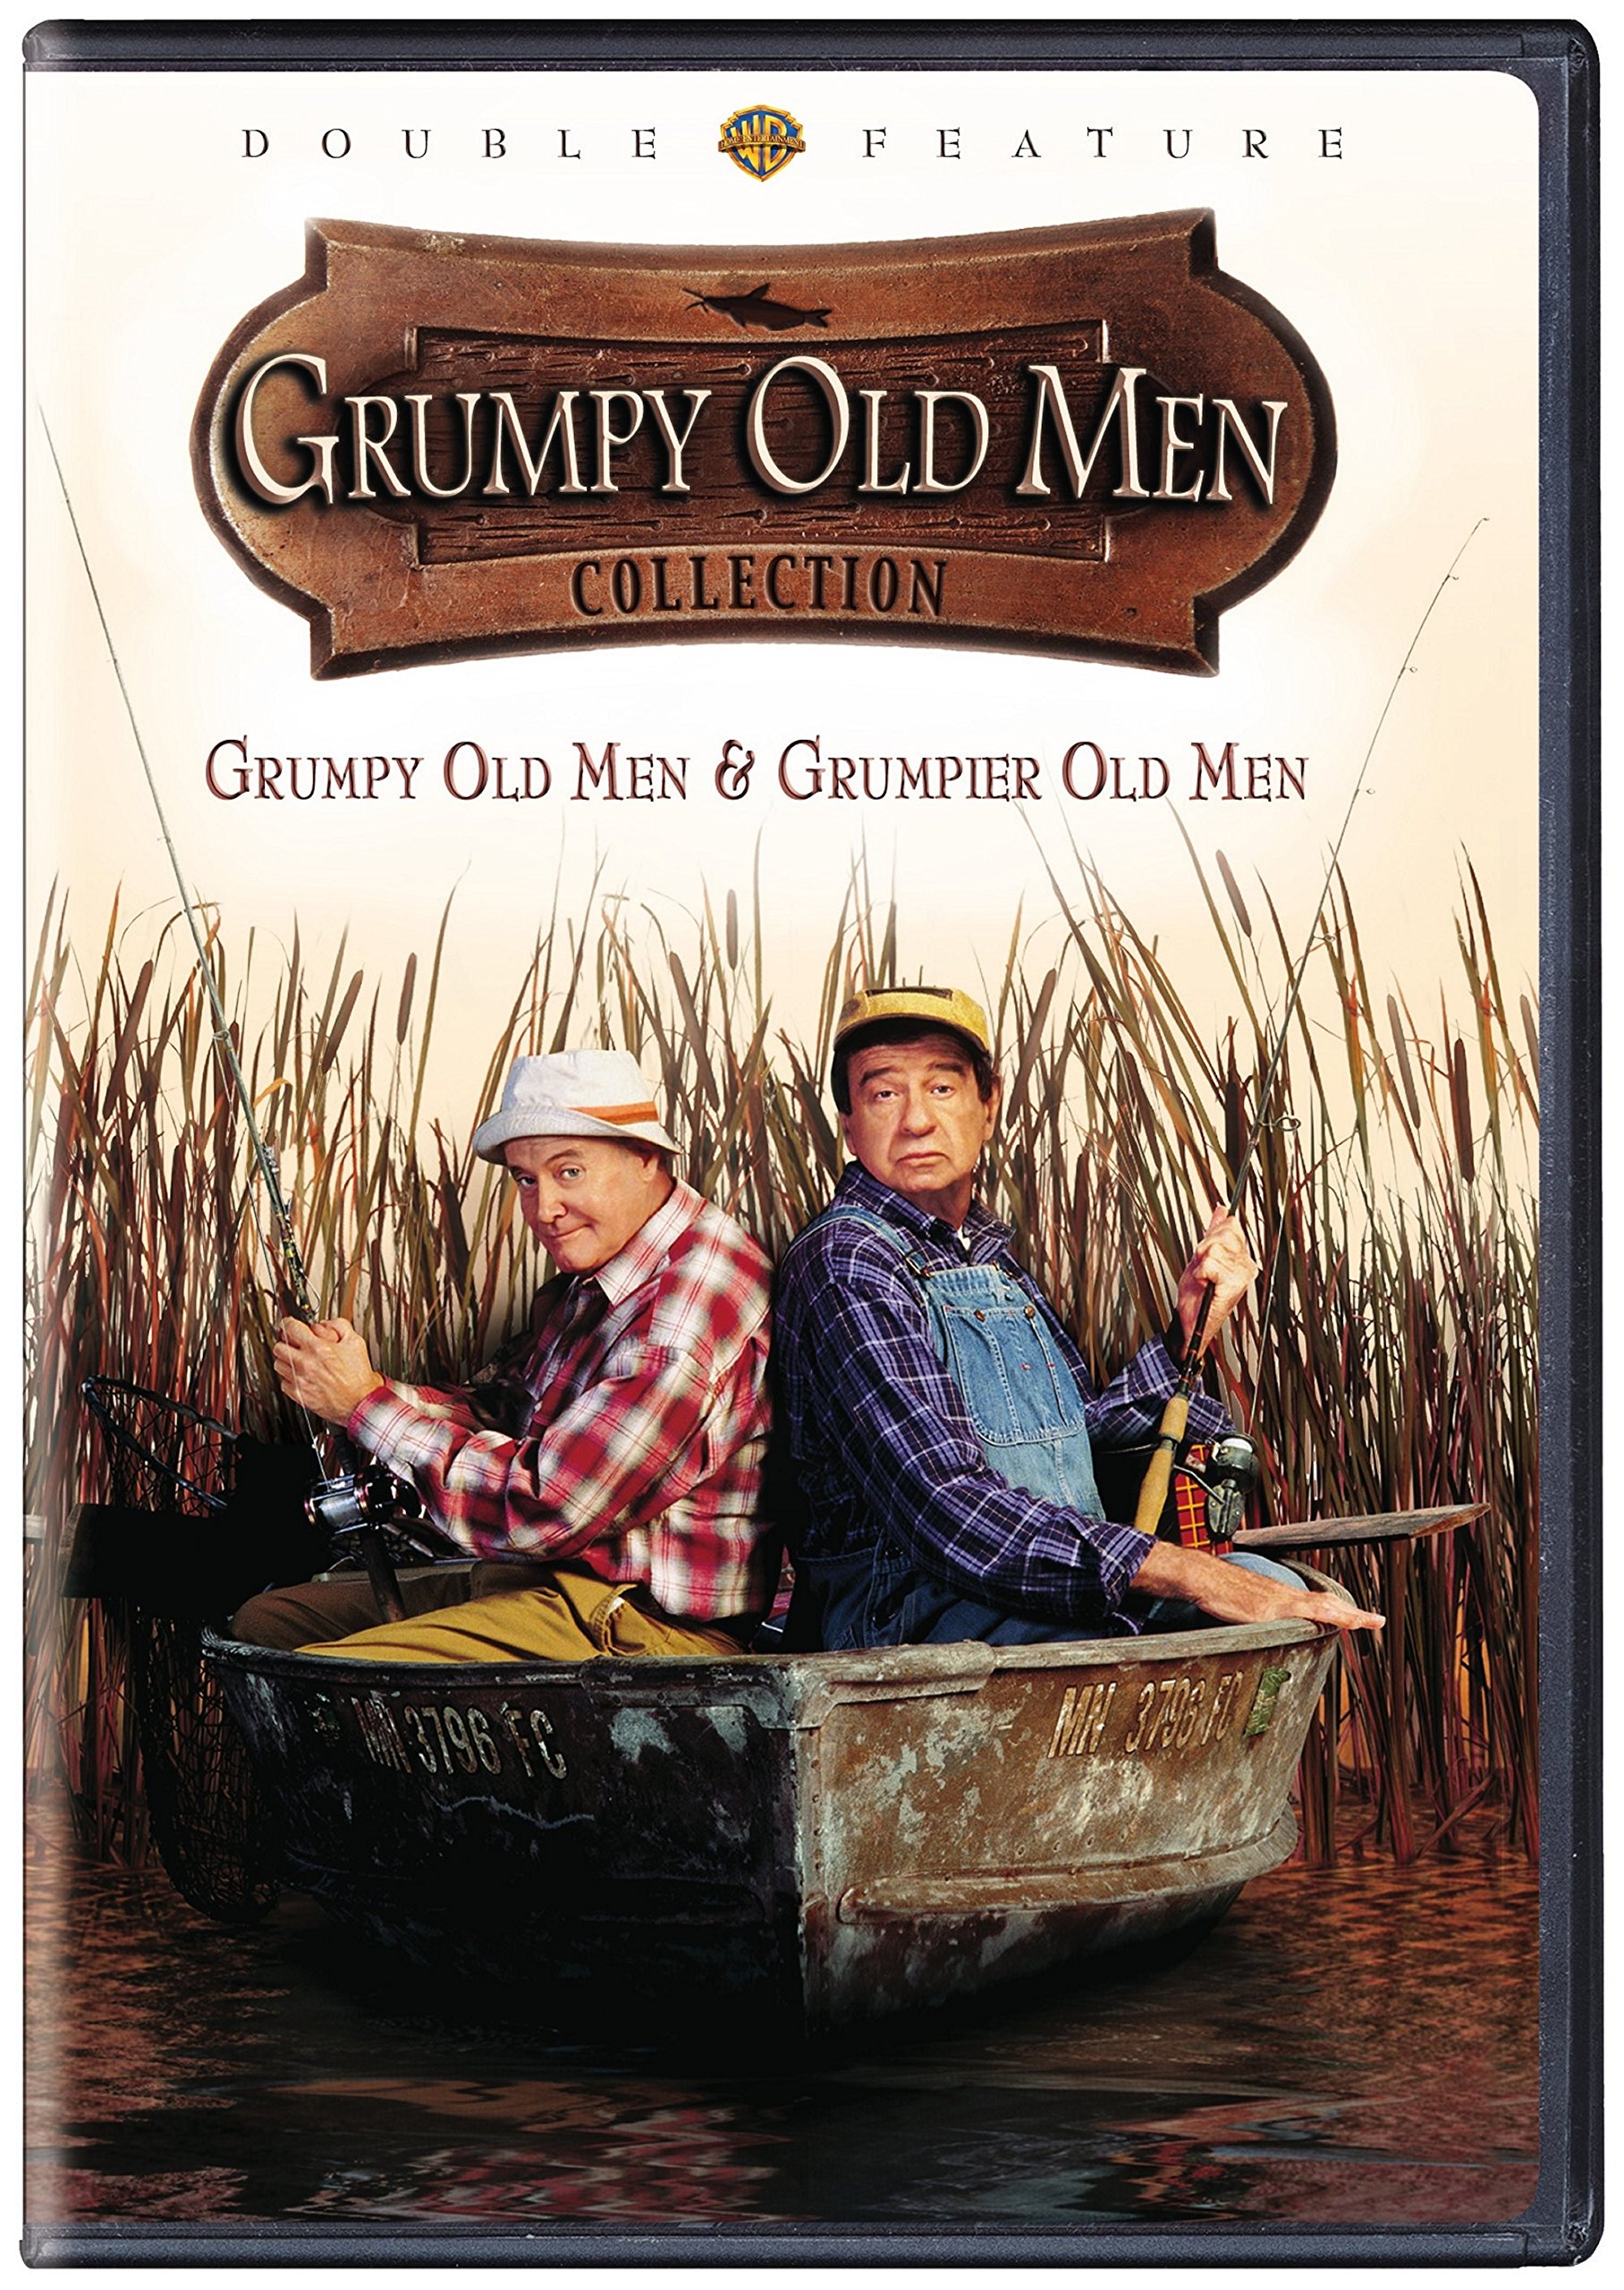 Grumpy Old Men Collection (DVD), Warner Home Video, Comedy - image 4 of 5